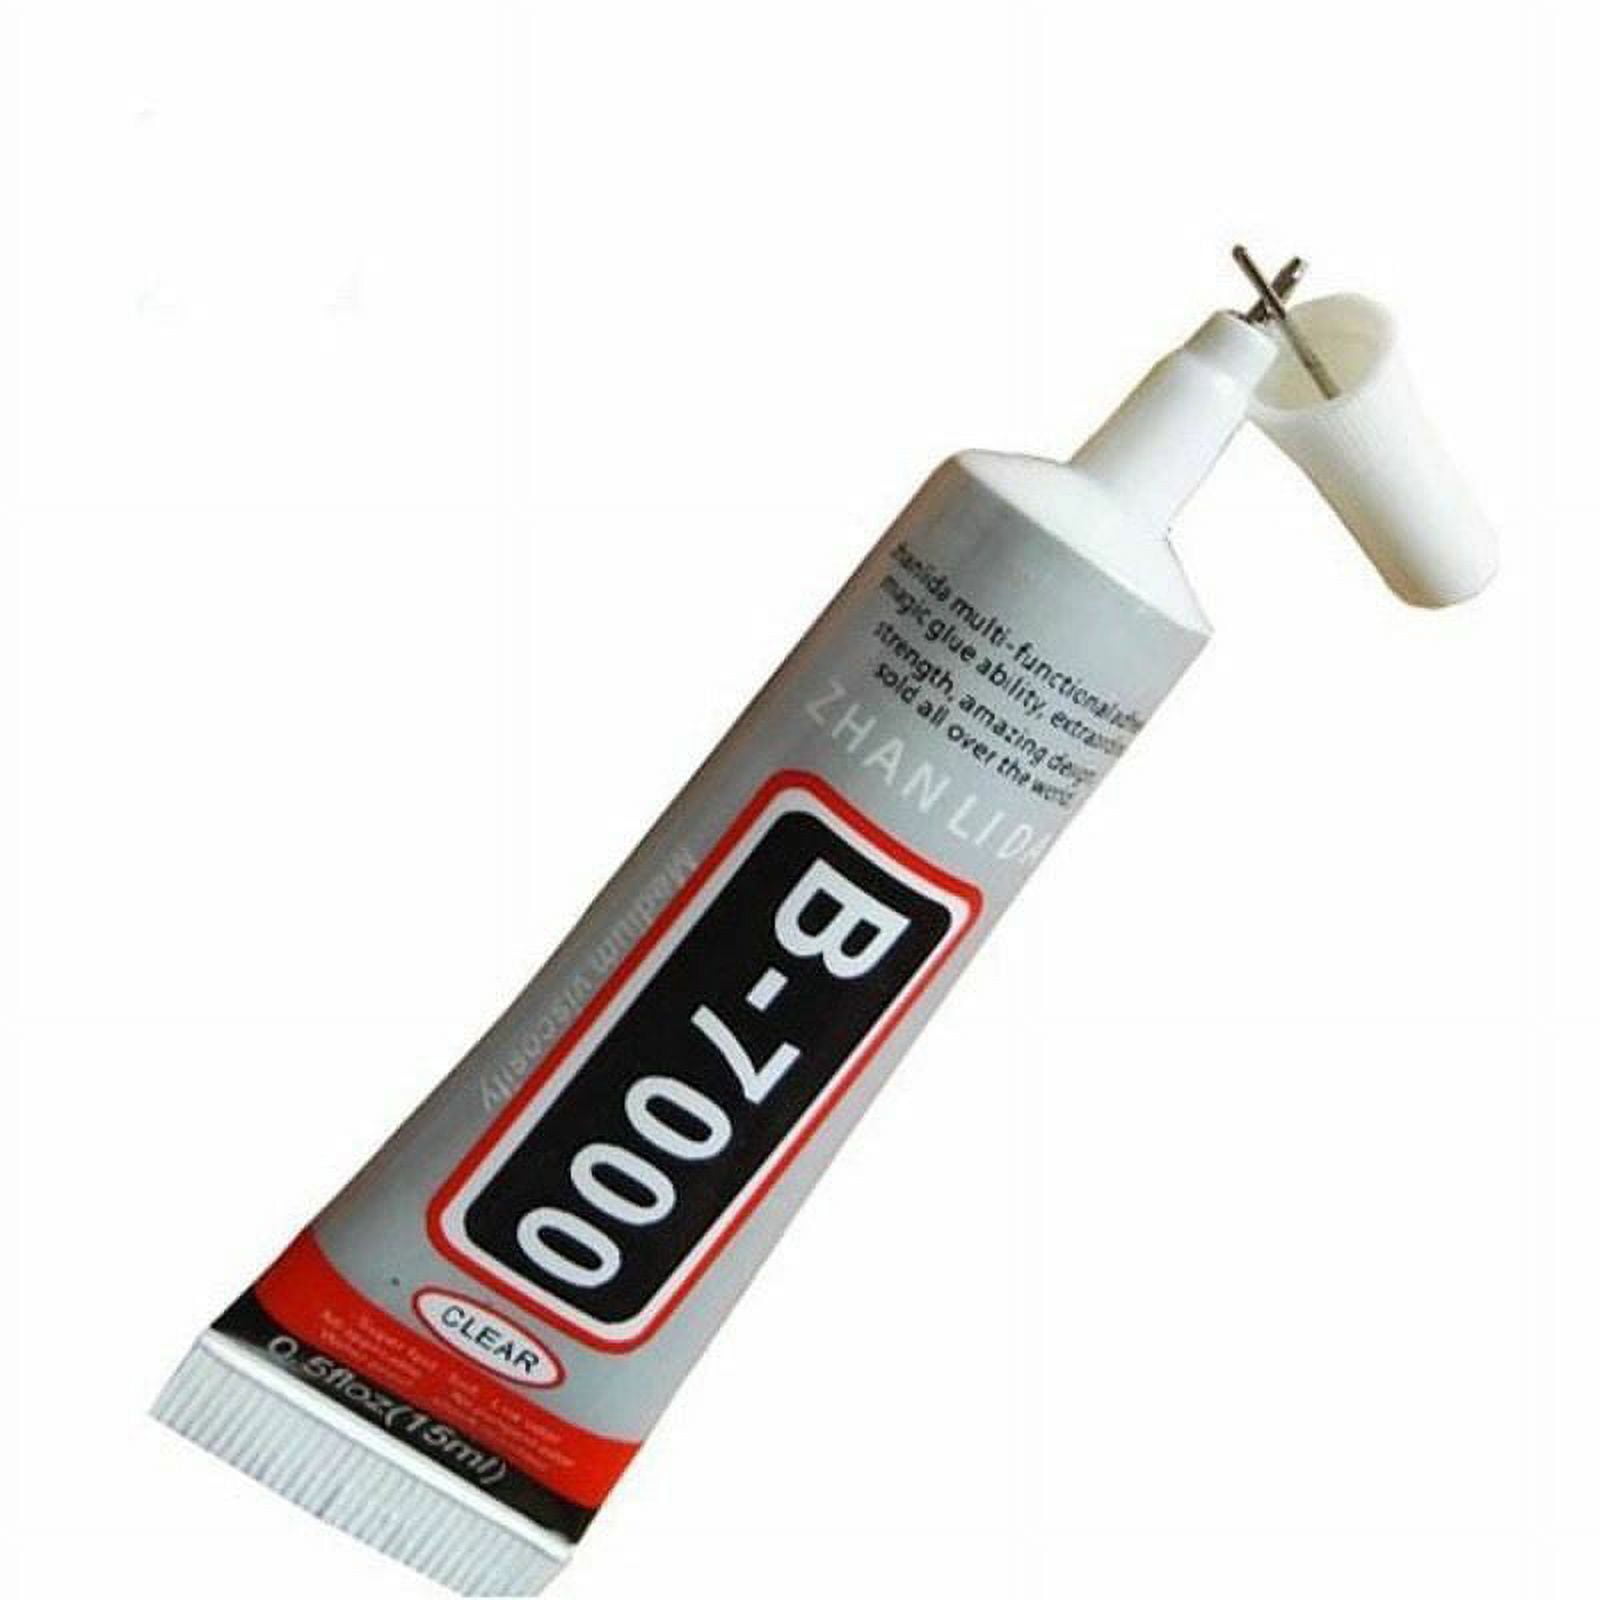 B-7000 50ml Glue with Precision Tips Adhesive Glue for Craft DIY Jewelry  Phone Screen Repair RC Tires Paste 2 Pack